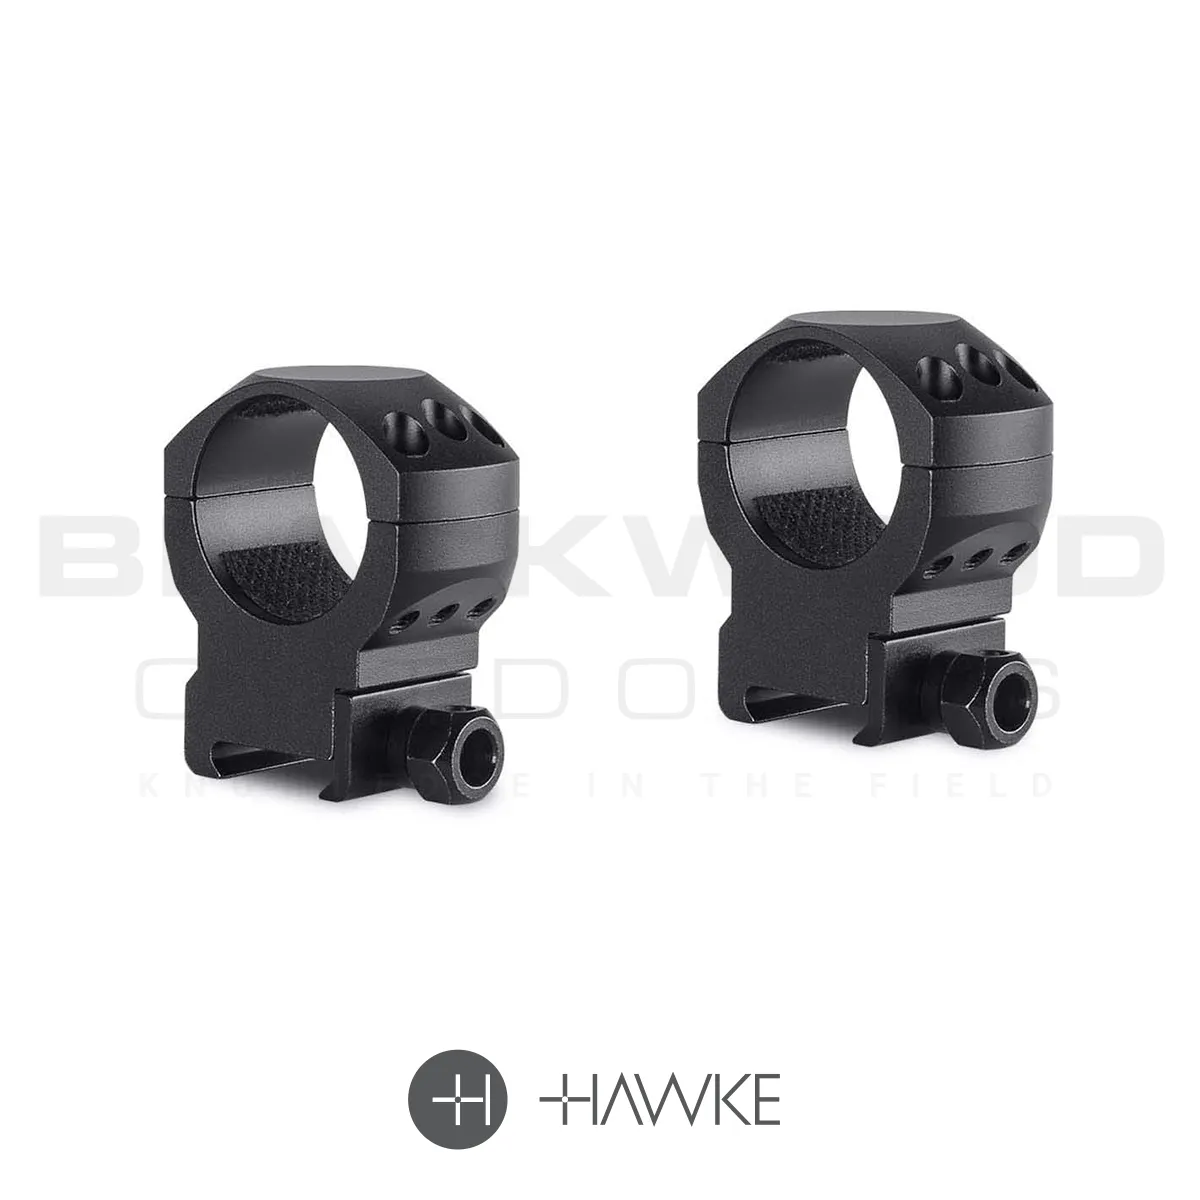 Hawke Tactical High 30mm scope mounts for weaver or picatinny rail.